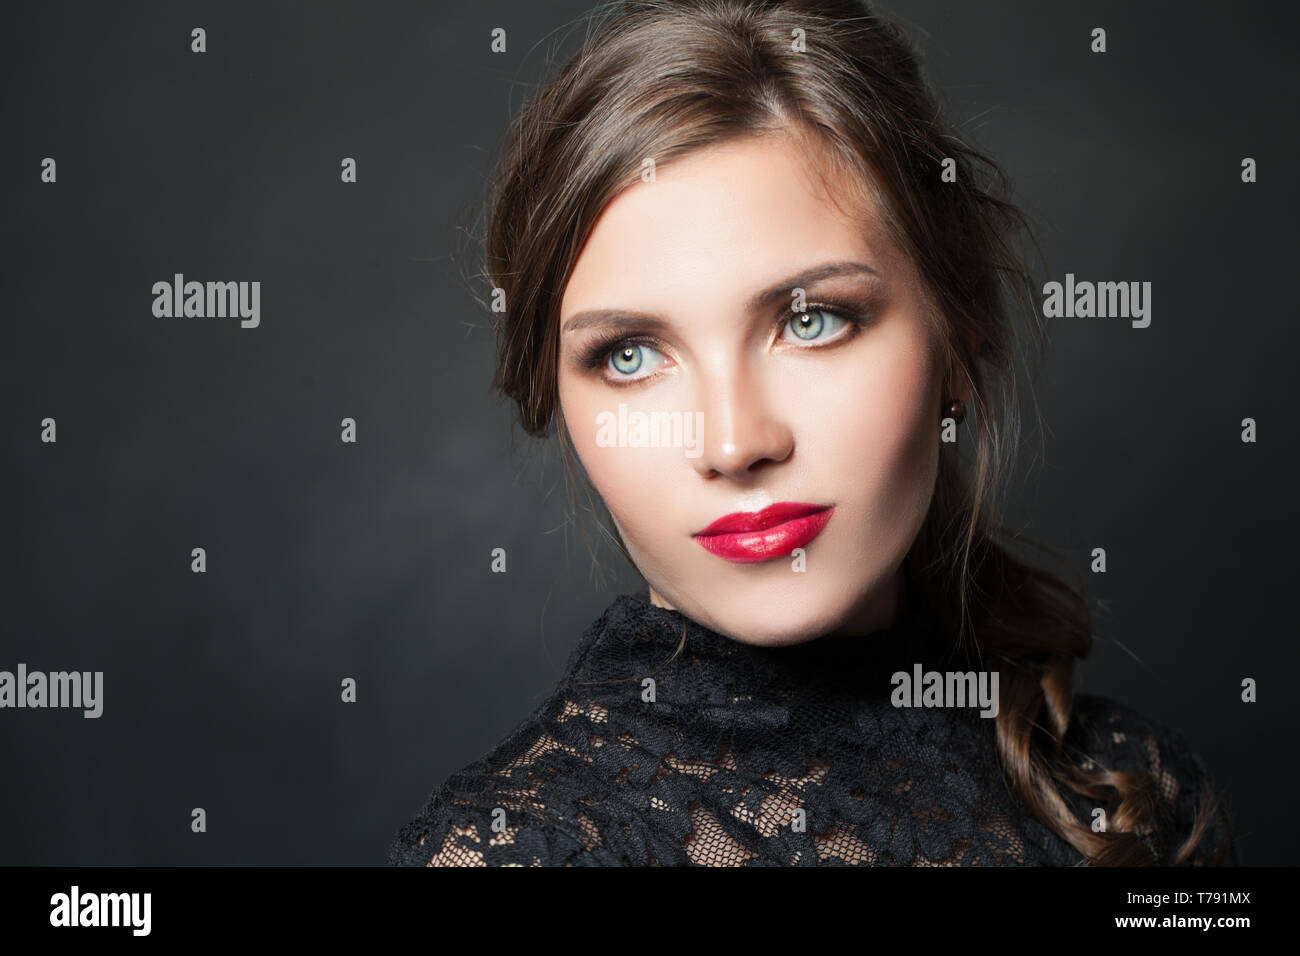 Stylish woman with red lips makeup hair on dark background Stock Photo